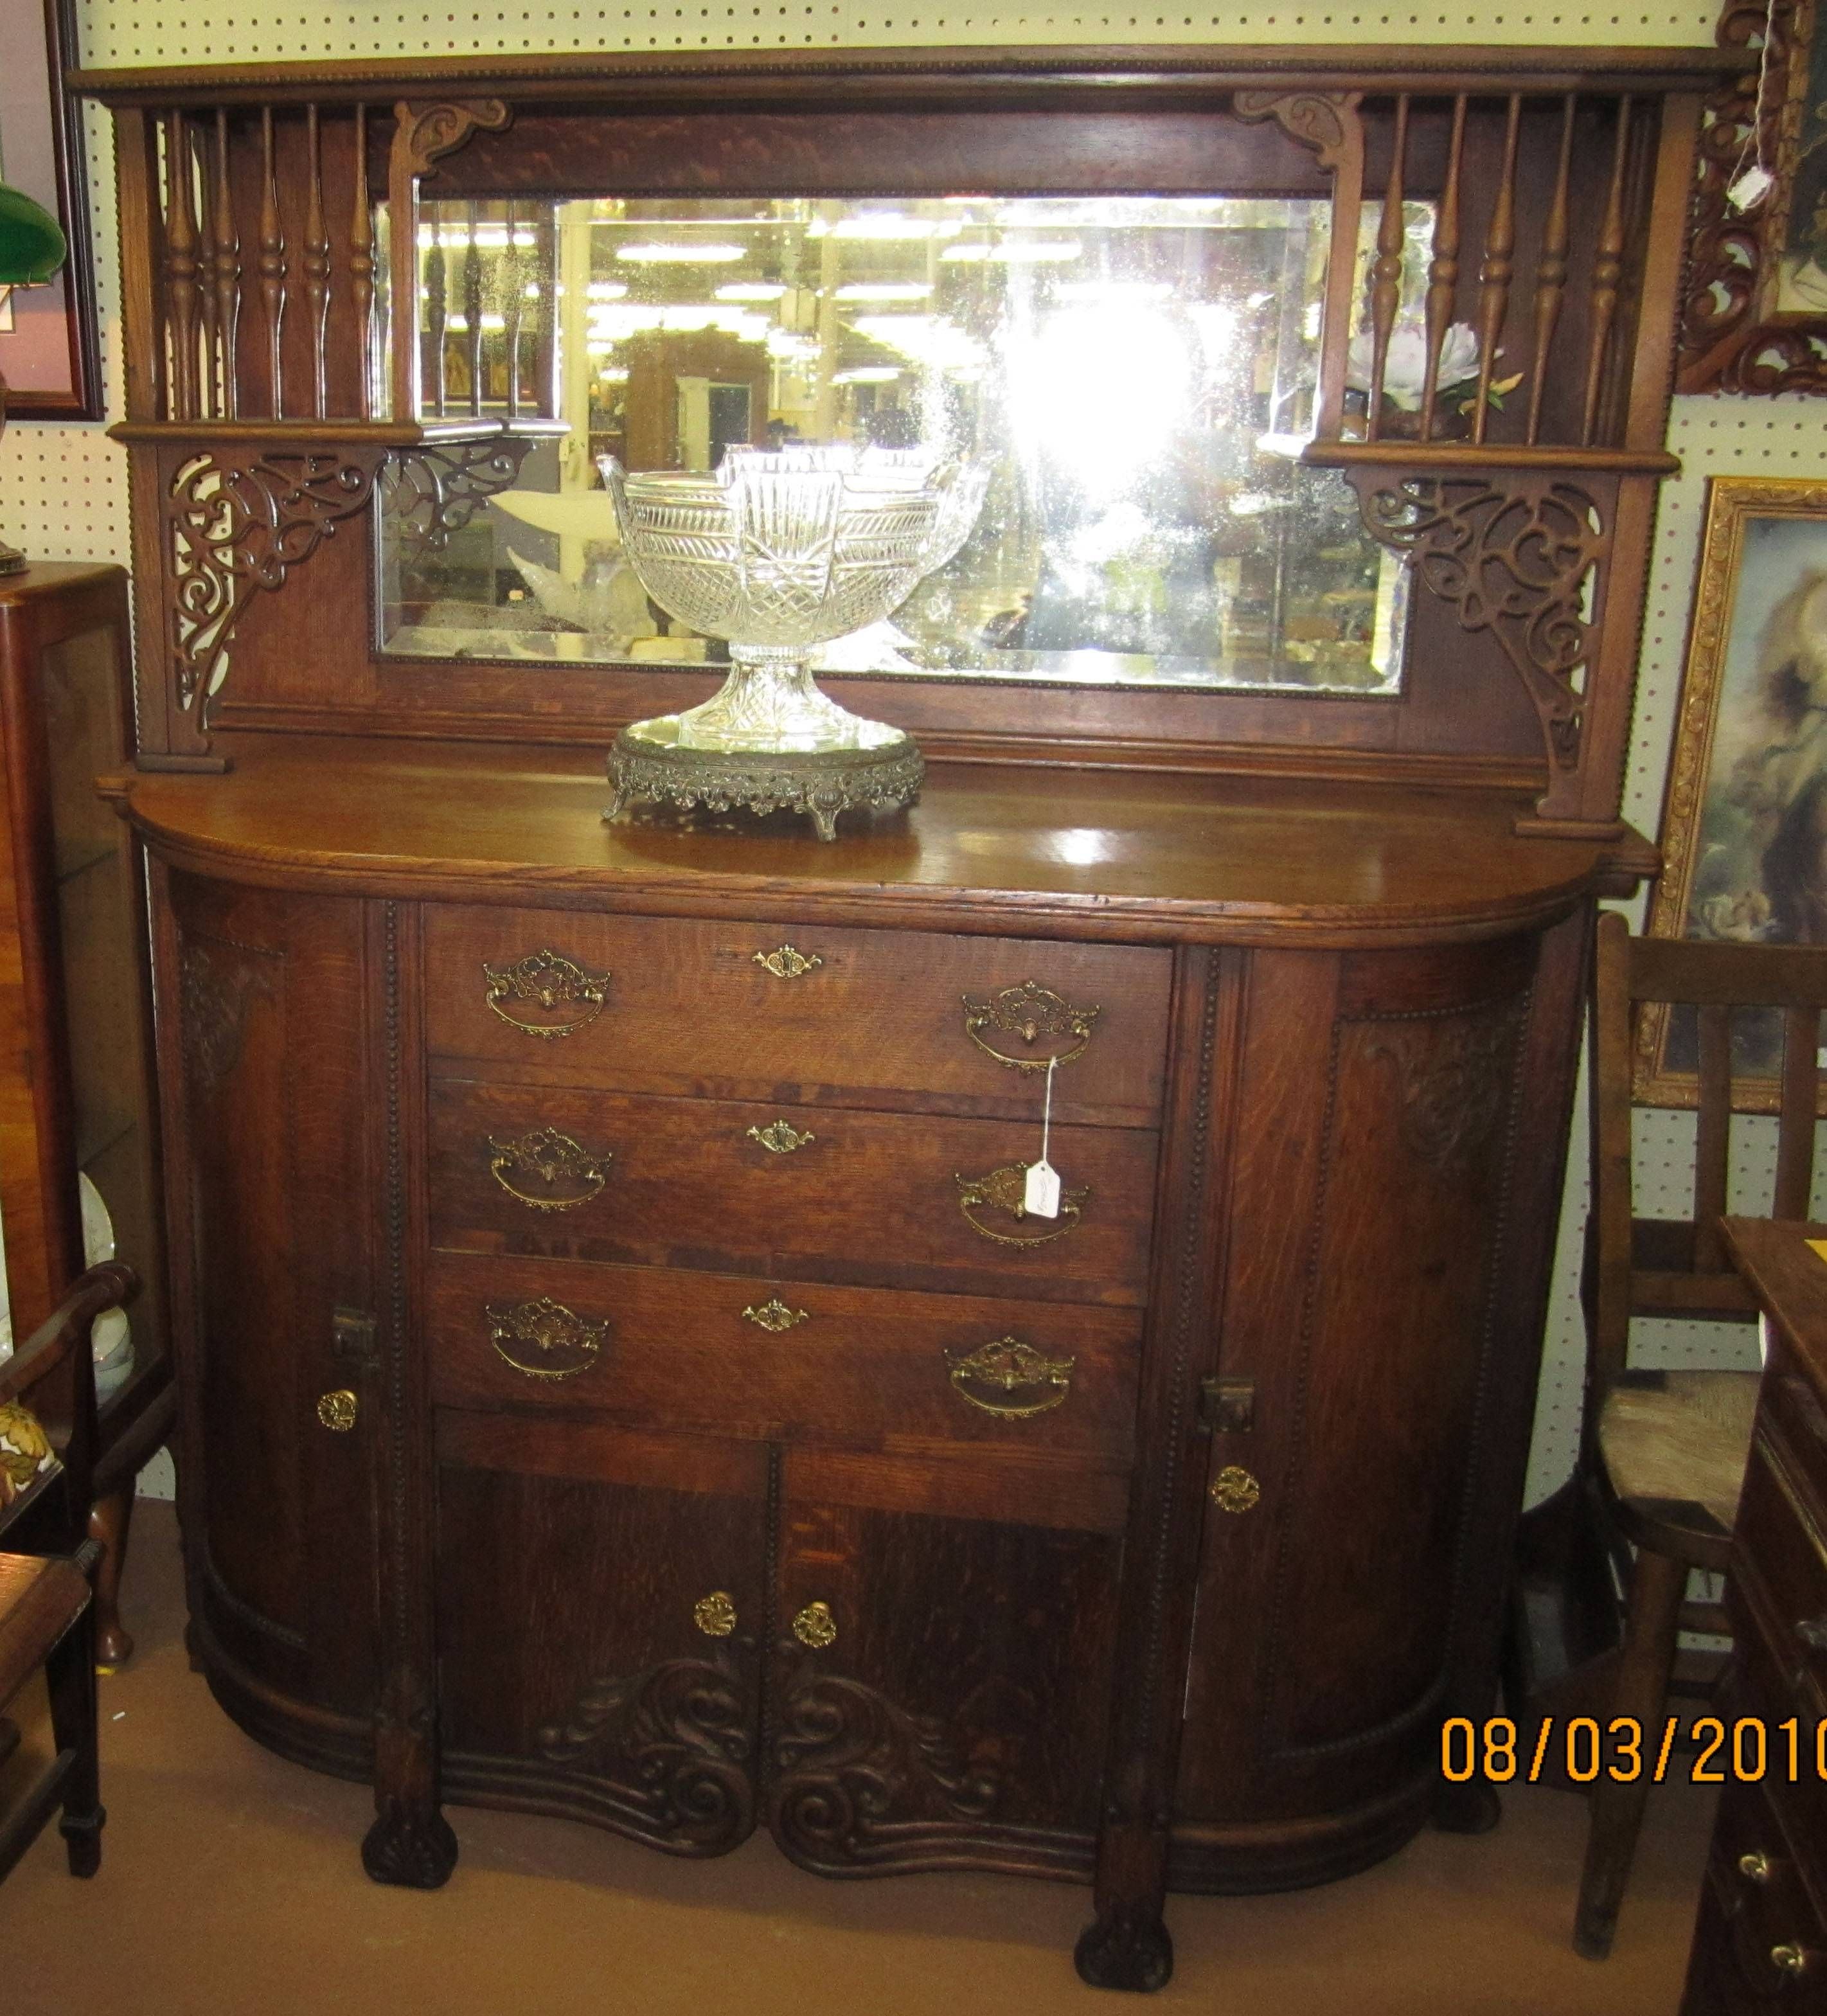 Antiques | Classifieds| Antiques » Antique Furniture » Antique Intended For Antique Buffet Sideboards (View 11 of 15)